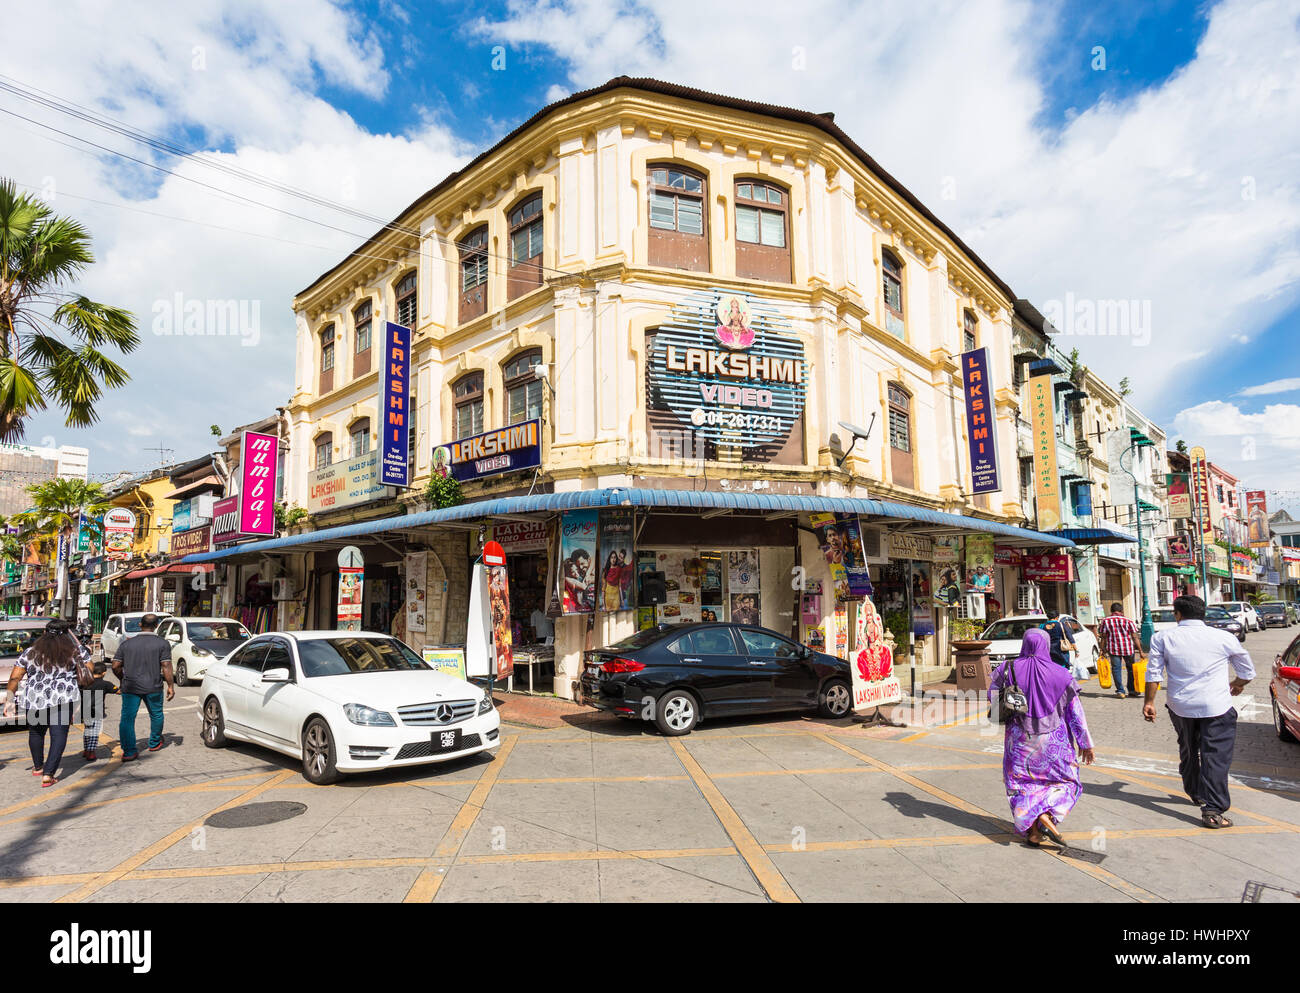 GEORGETOWN, MALAYSIA - NOVEMBER 13, 2016: People walk in the street of Little India historic district in Georgetown in Penang, Malaysia. Stock Photo